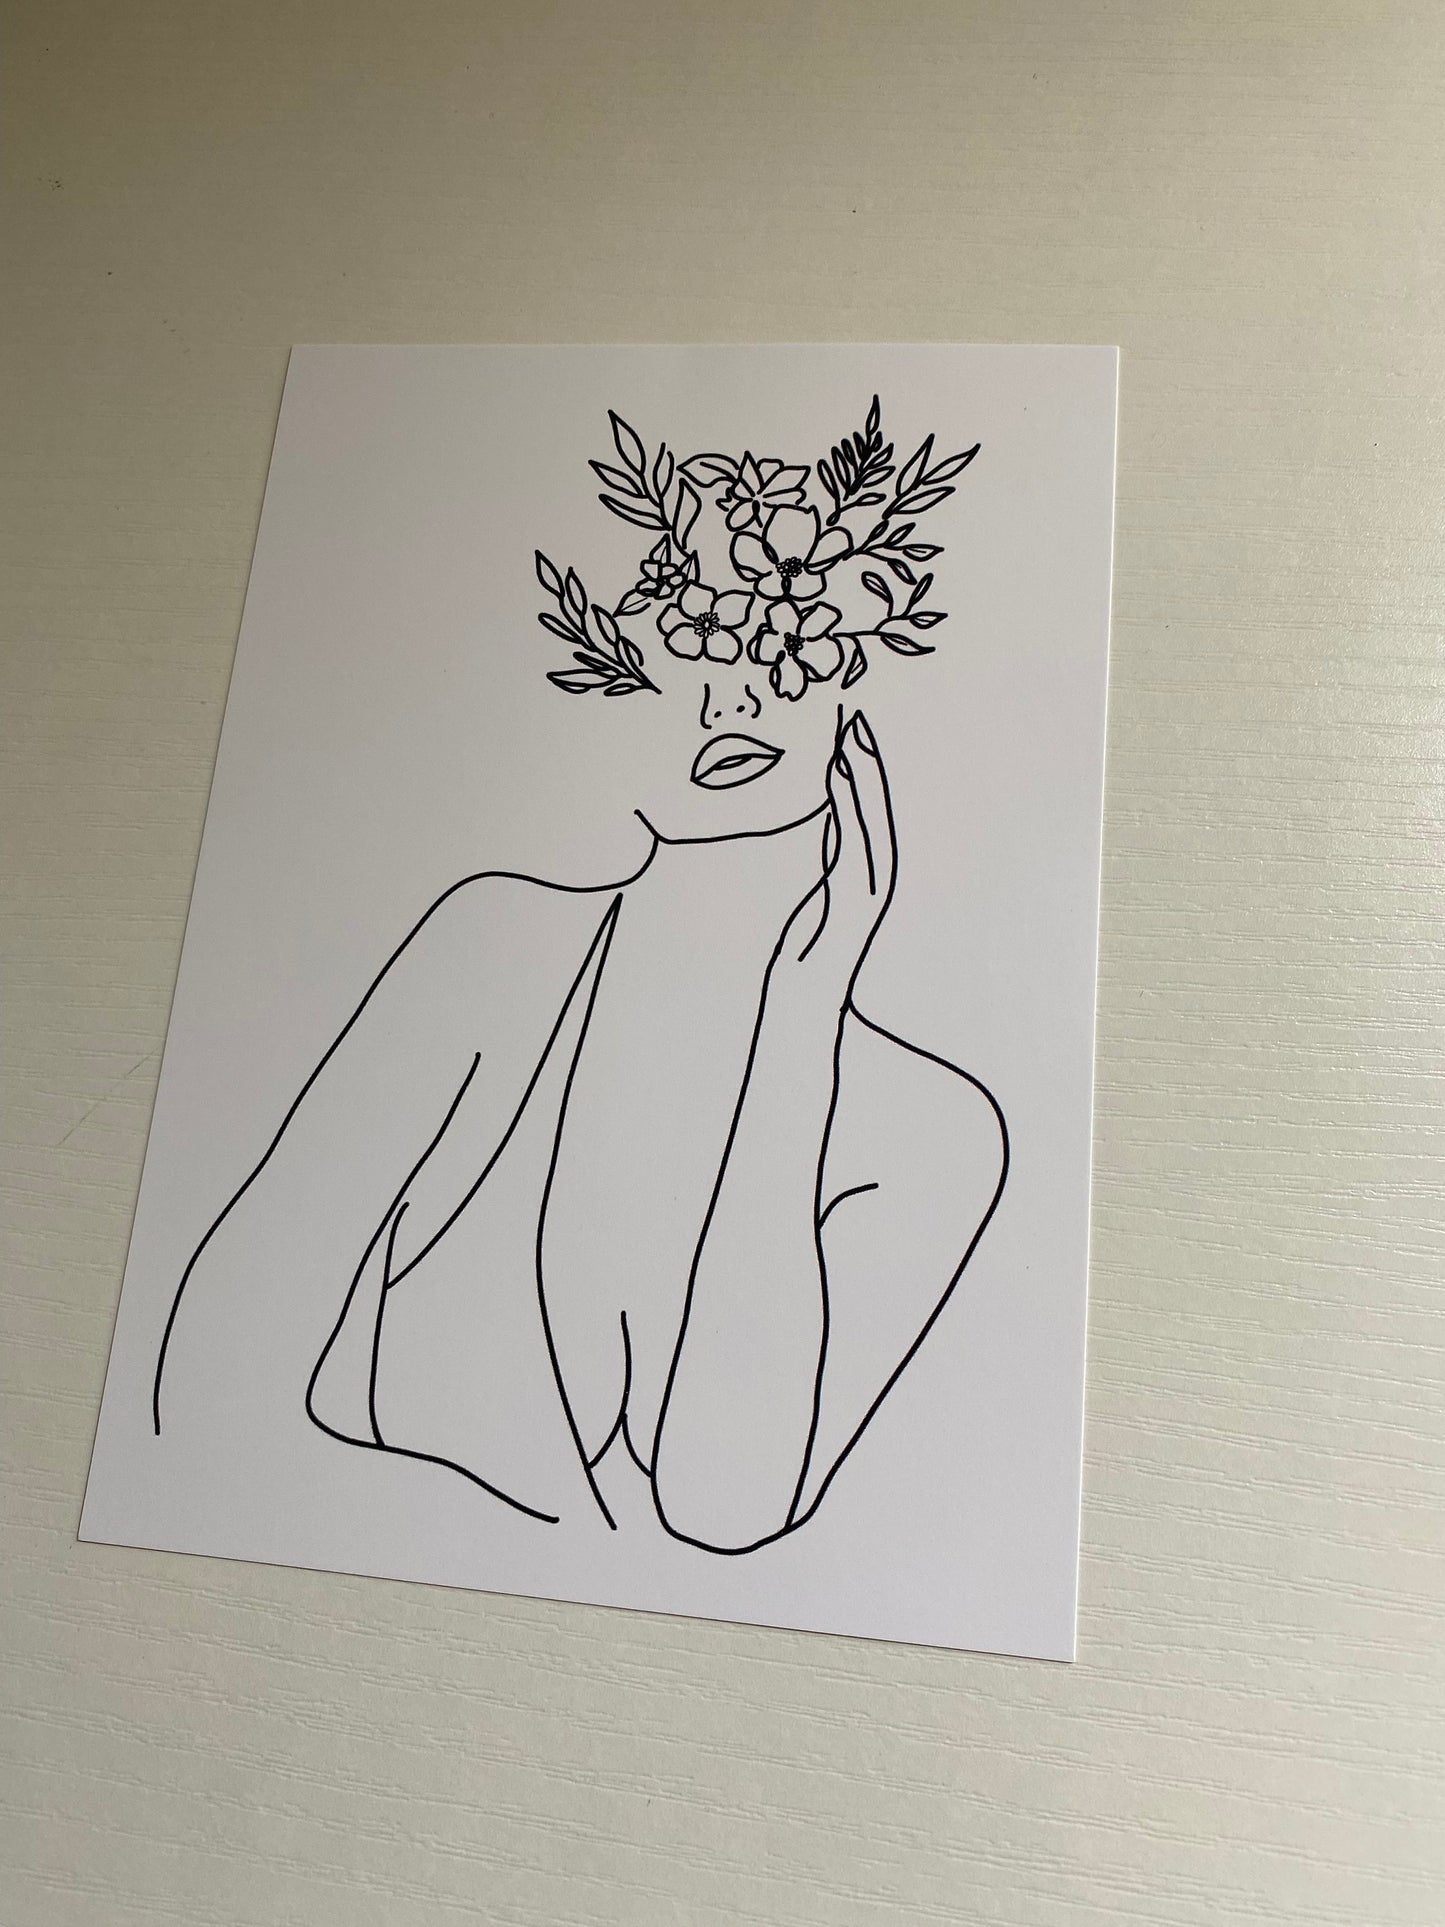 Dreamy Art Print, Head full of flowers, Minimalist woman drawing print, woman line drawing, gallery wall art, sophisticated abstract art